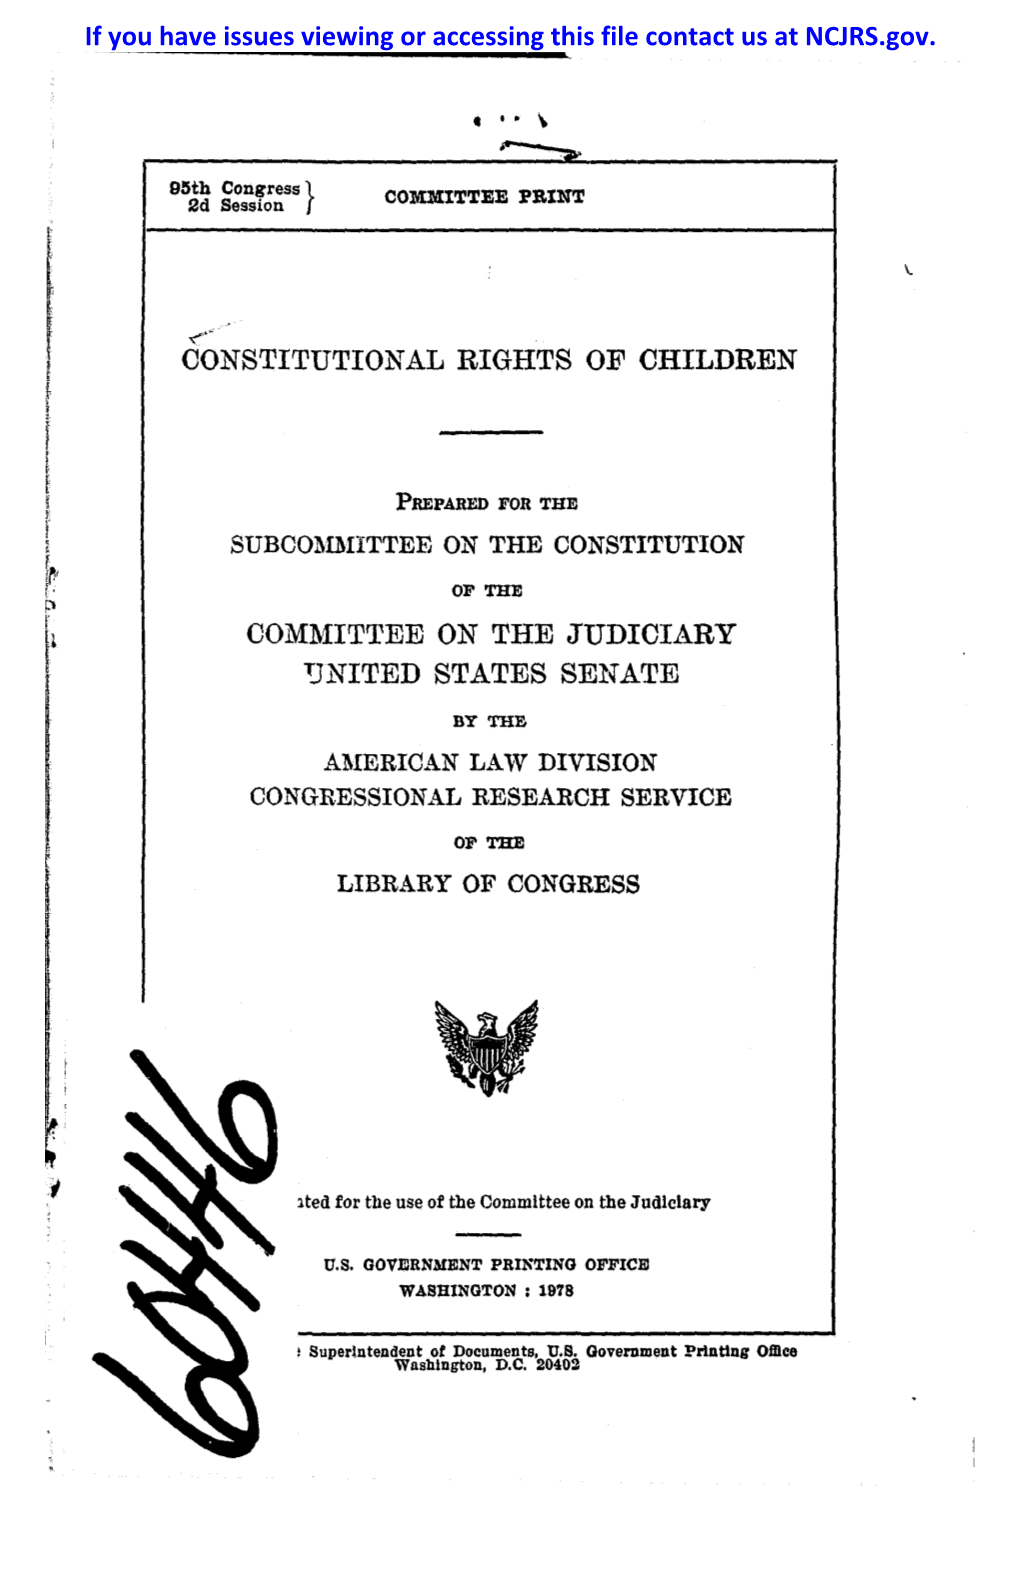 CONSTITUTIONAL RIGHTS of CHILDREN COMMITTEE on the JUDICIARY TJNITED STATES SENATE If You Have Issues Viewing Or Accessing This